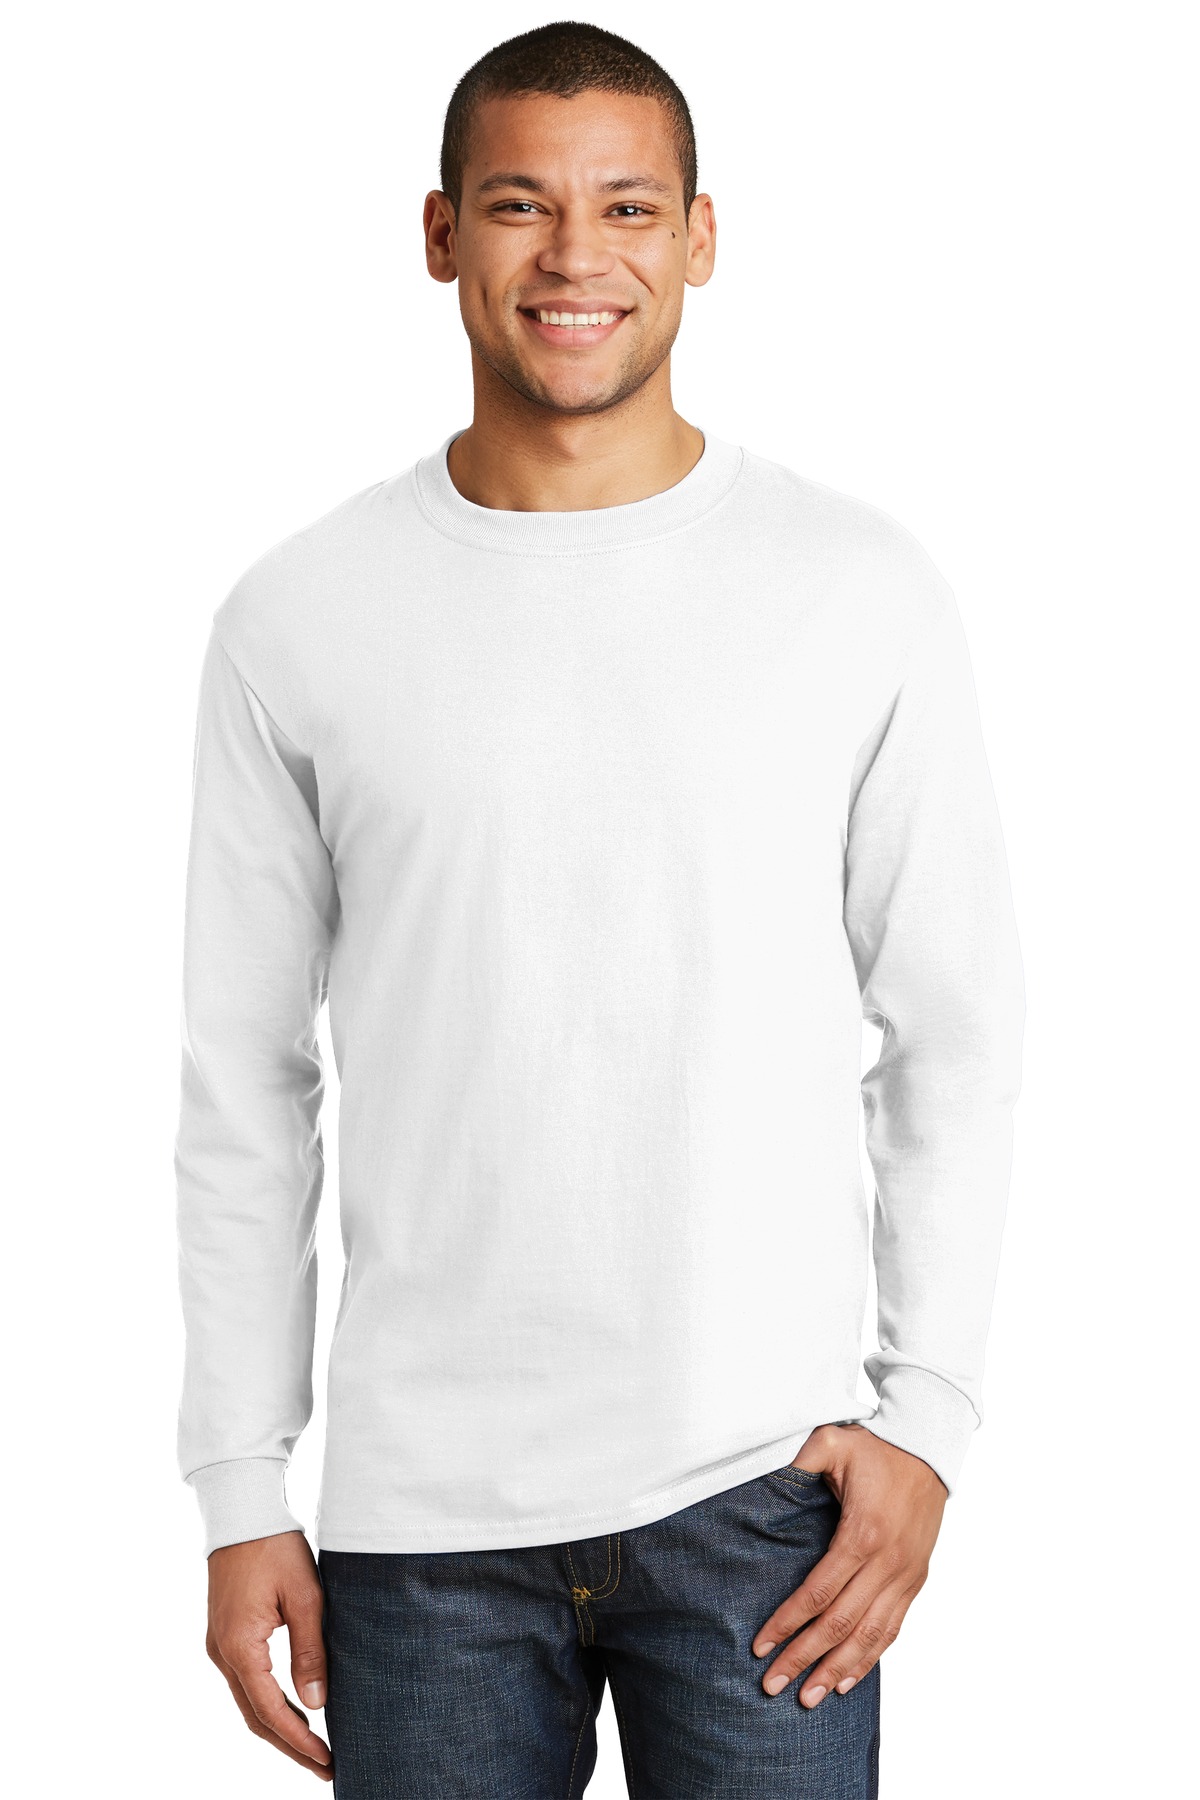 Hanes Beefy-T - 100% Cotton Long Sleeve T-Shirt-